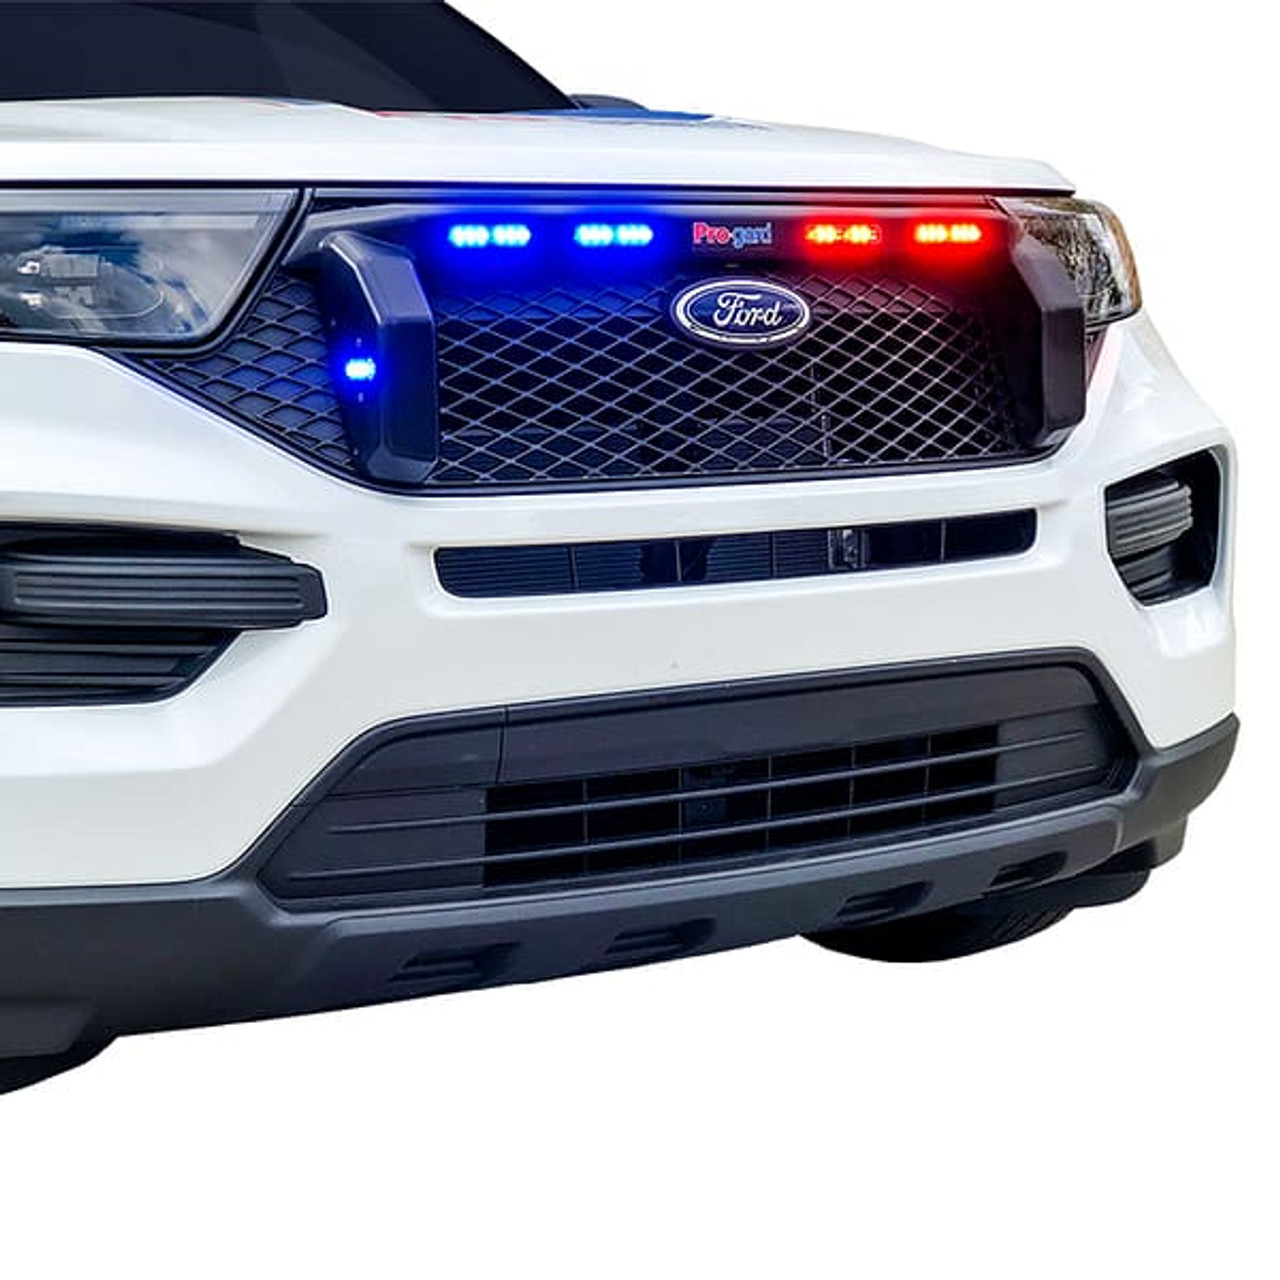 Pro-Gard CG, Command Grille For No-Push Policy Agencies, Whelen T-Ion or SoundOff mPower Lighting Options, For 2020-2020 Ford Interceptor Utility